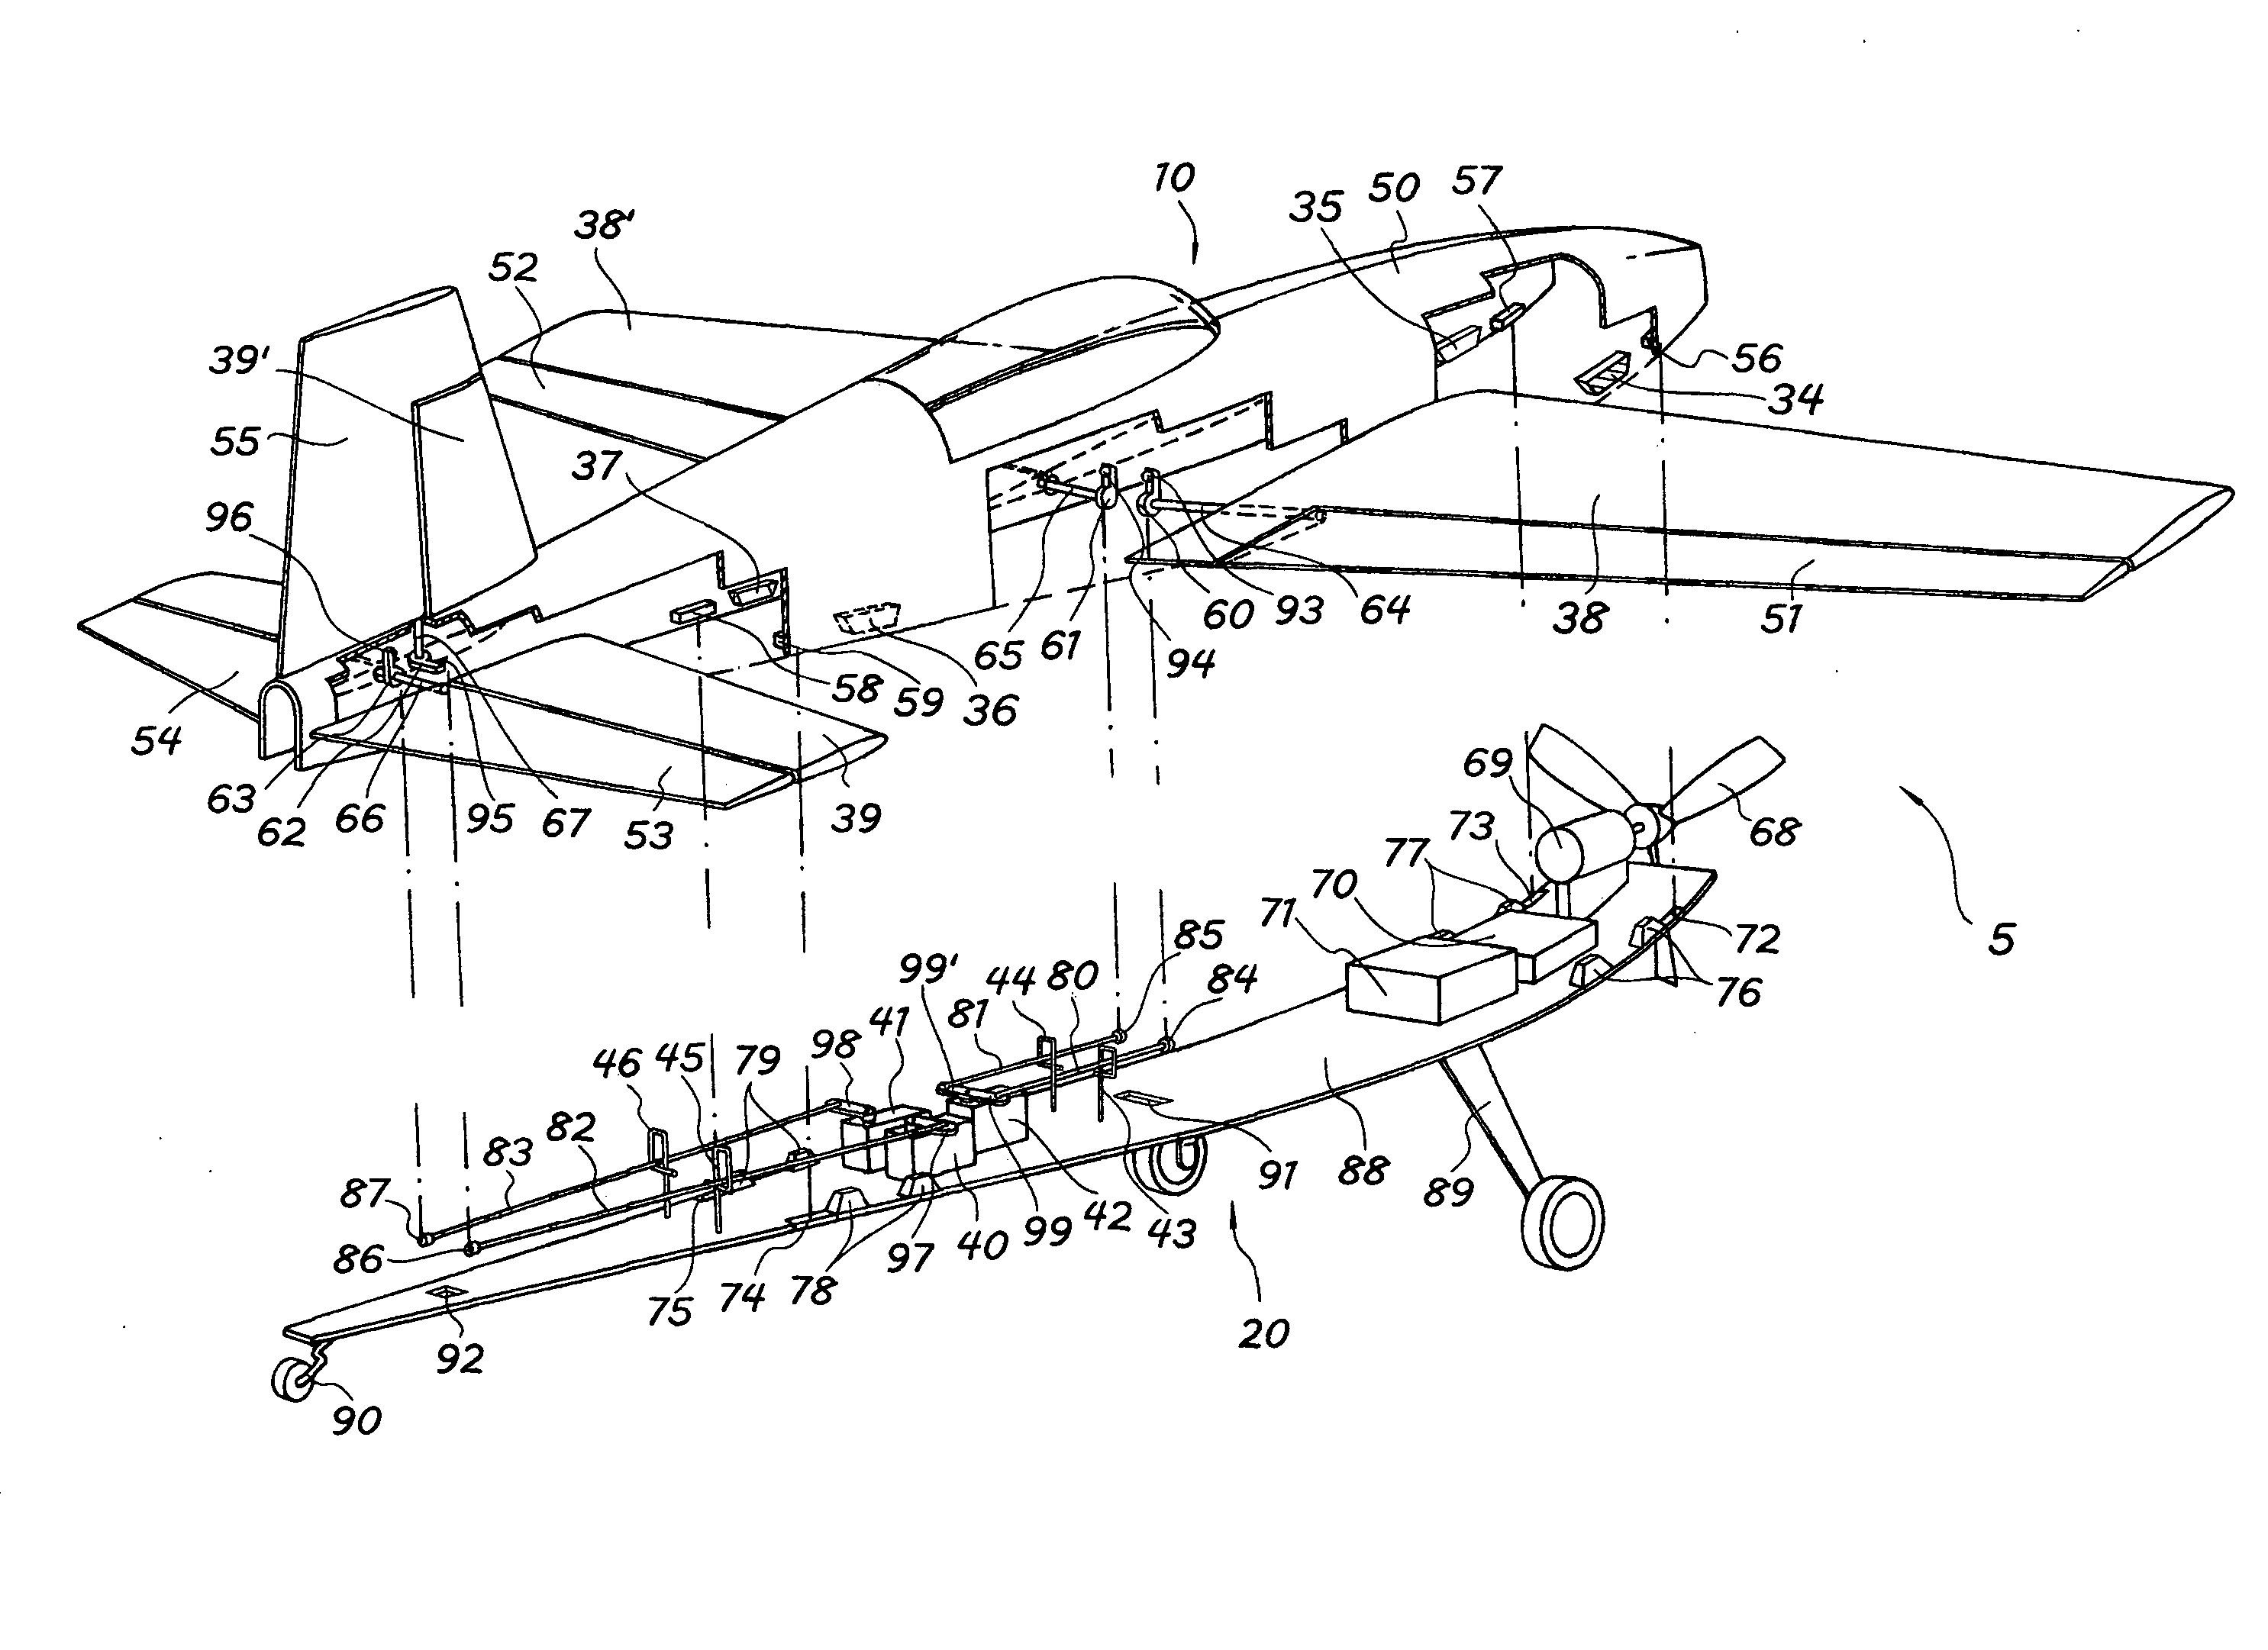 Modularized airplane structures and methods